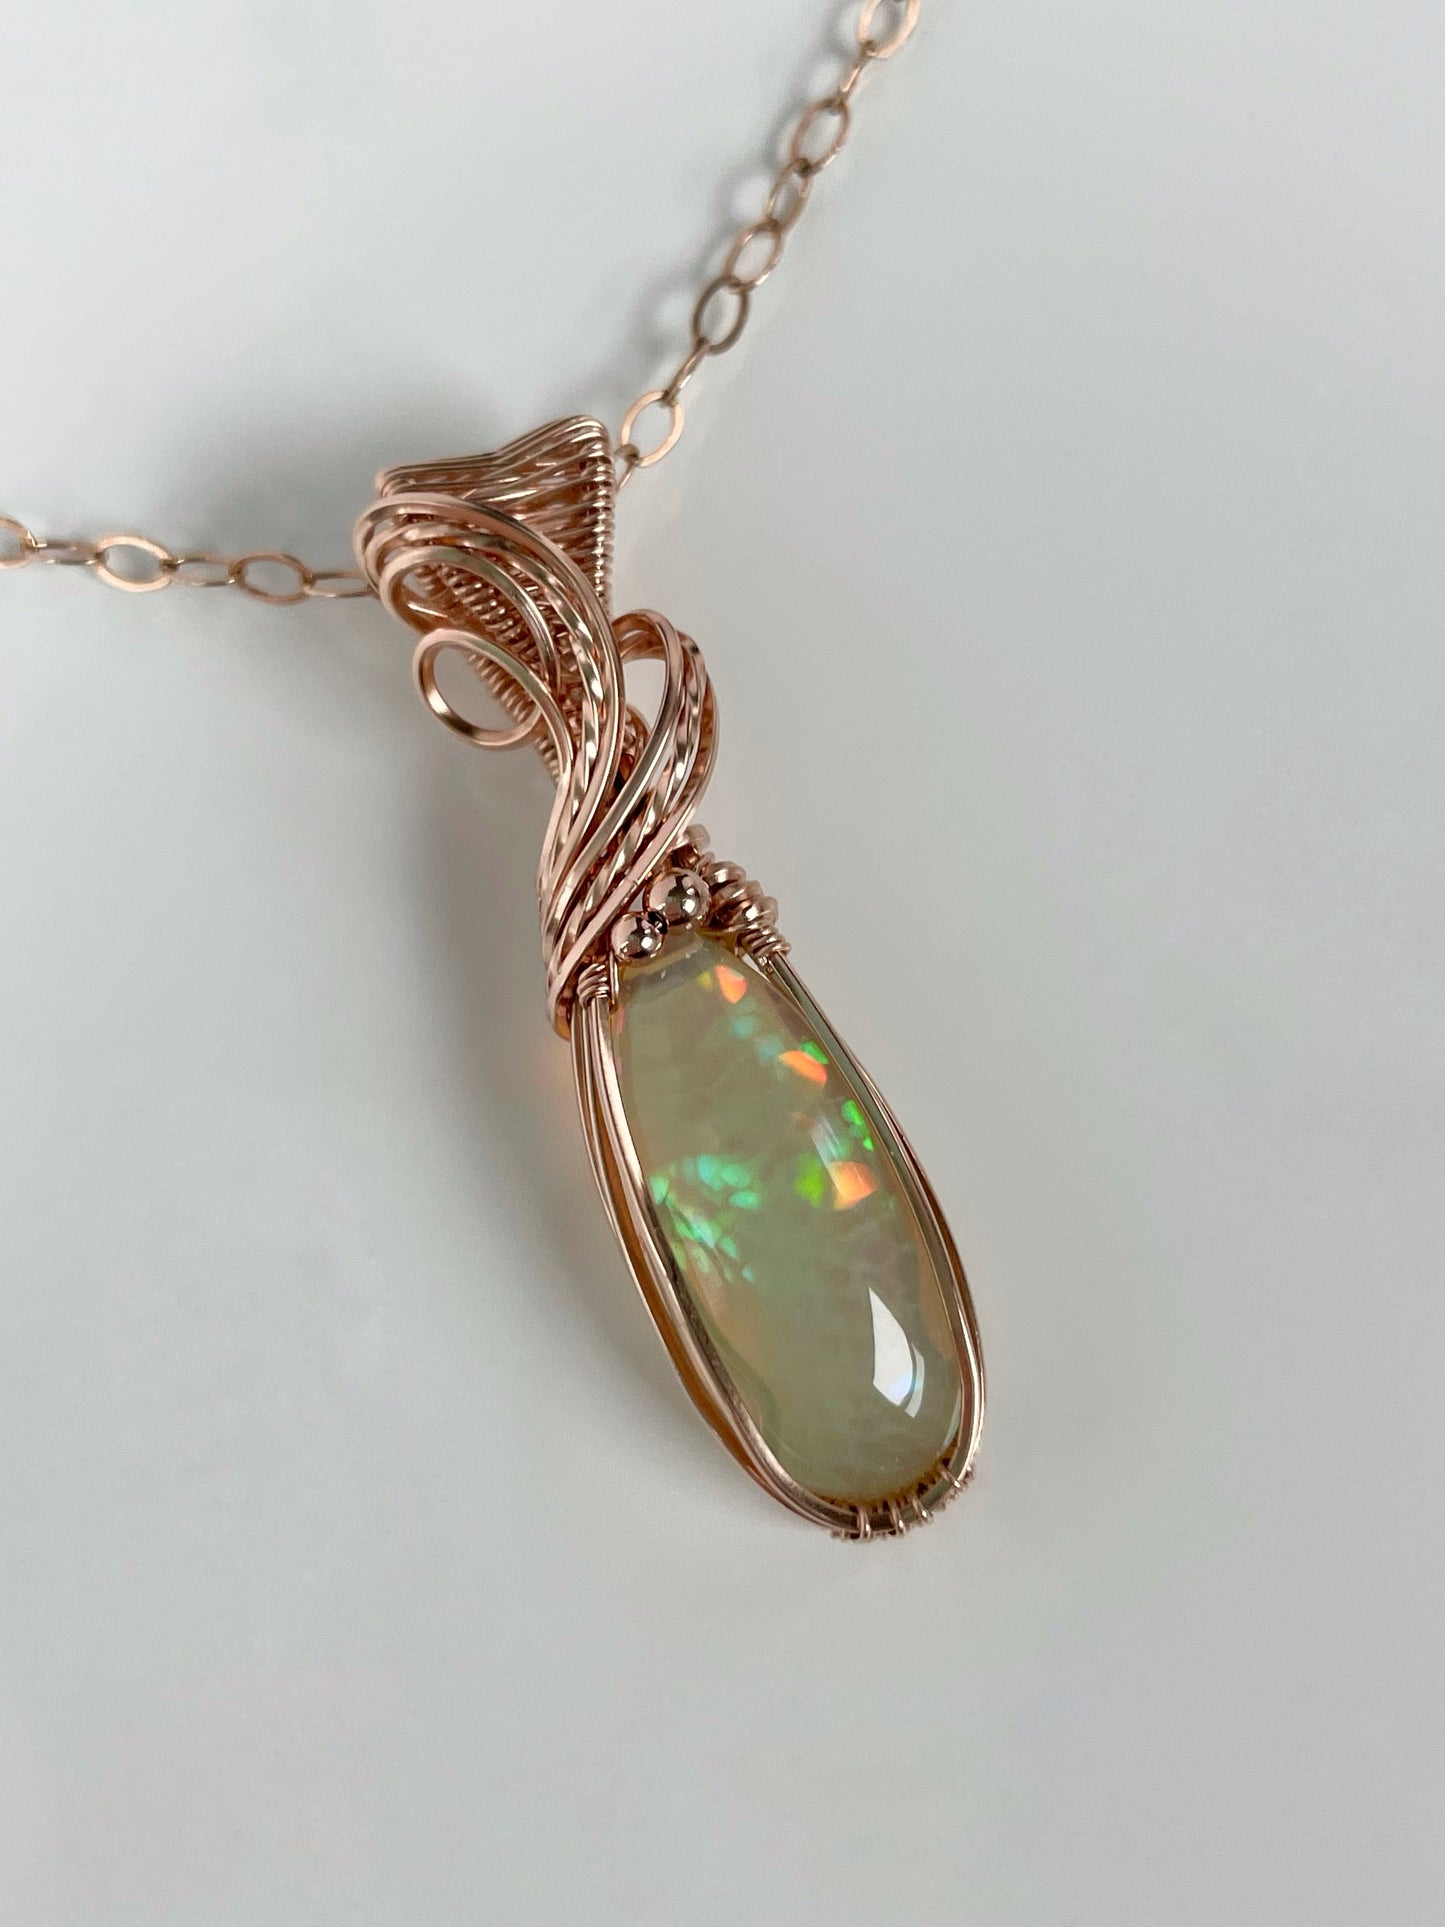 4.75ct Honeycomb Patterned Ethiopian Opal Necklace in 14k Rose Gold Filled